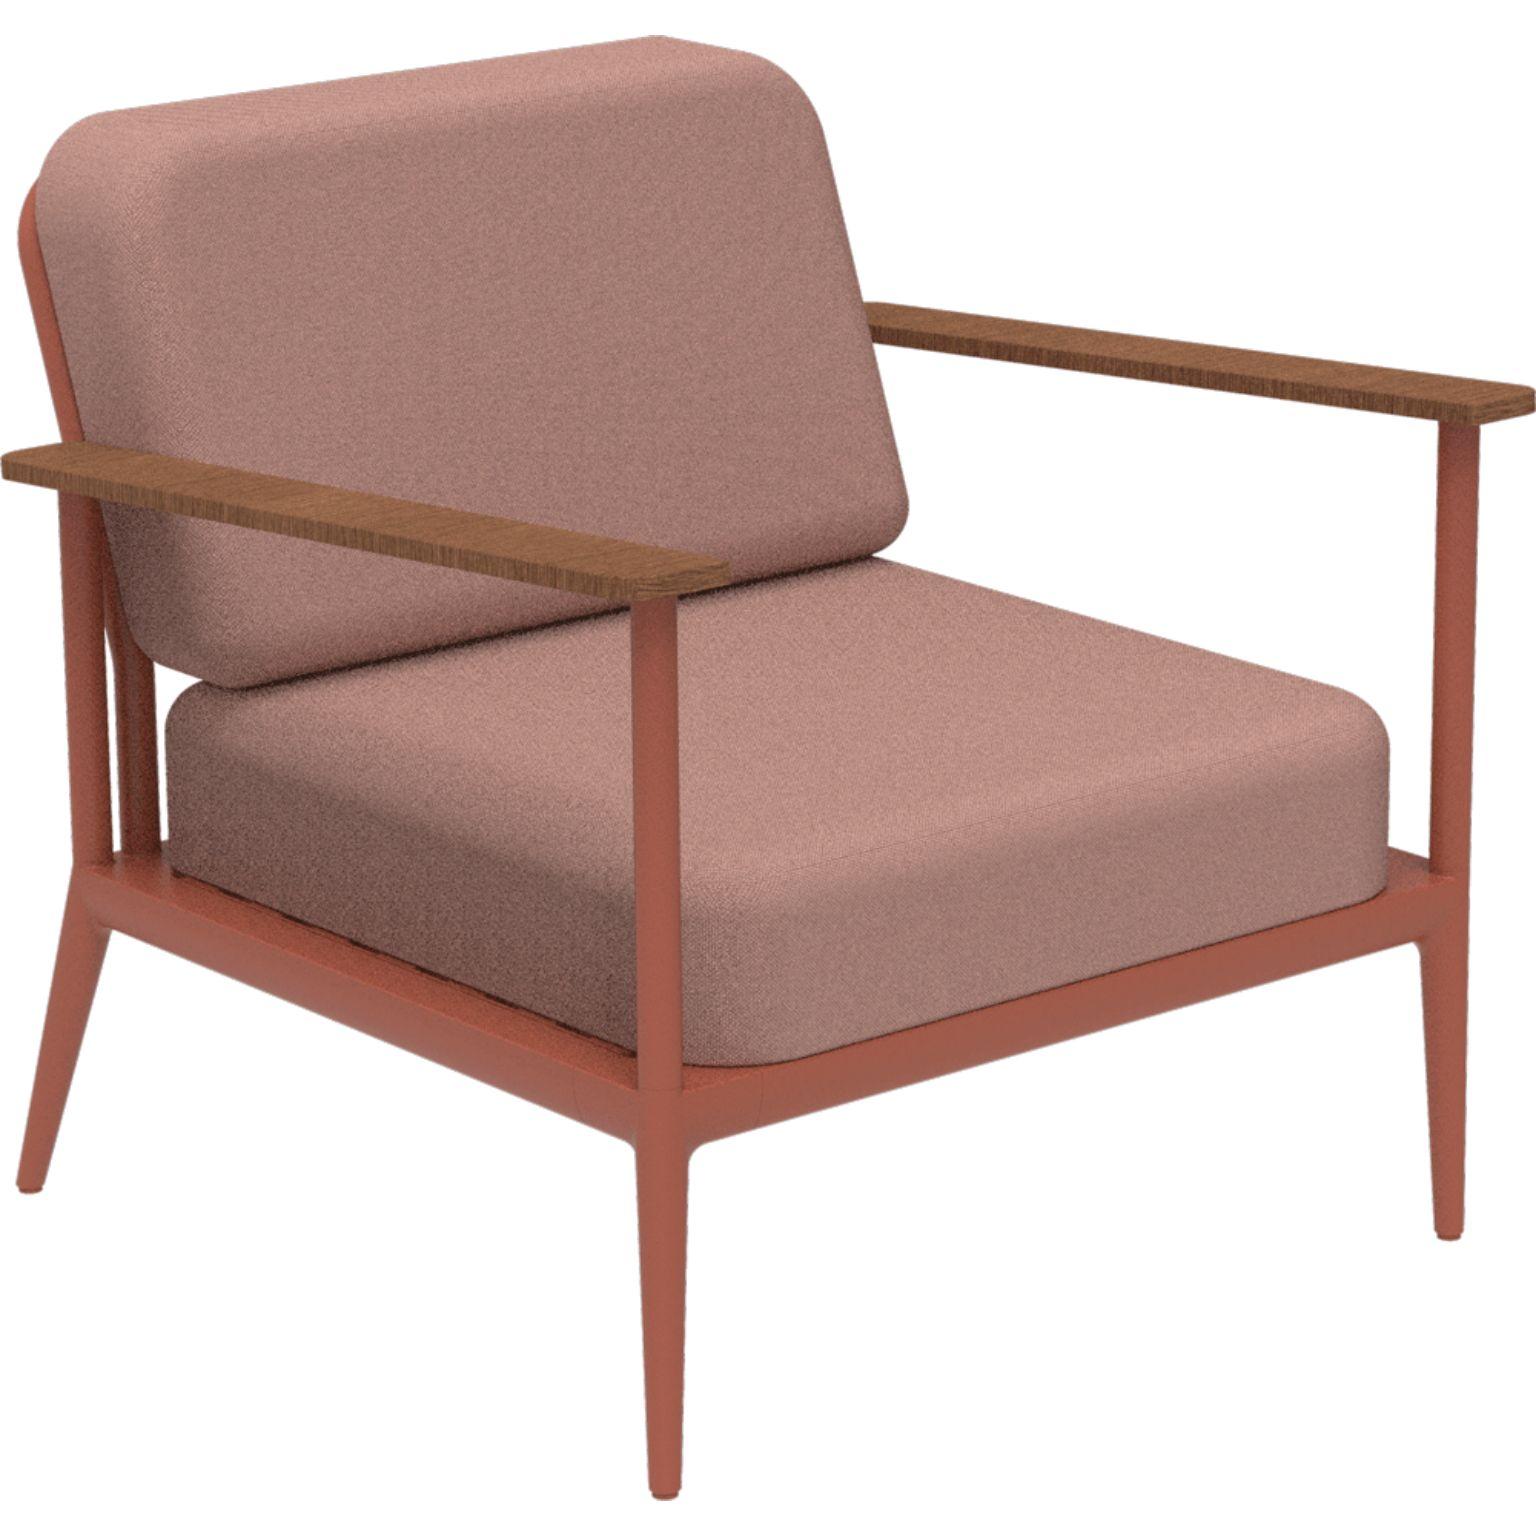 Nature salmon longue chair by MOWEE.
Dimensions: D85 x W83 x H81 cm (seat height 42 cm).
Material: aluminum, upholstery and Iroko Wood.
Weight: 20 kg.
Also available in different colors and finishes.

An unmistakable collection for its beauty